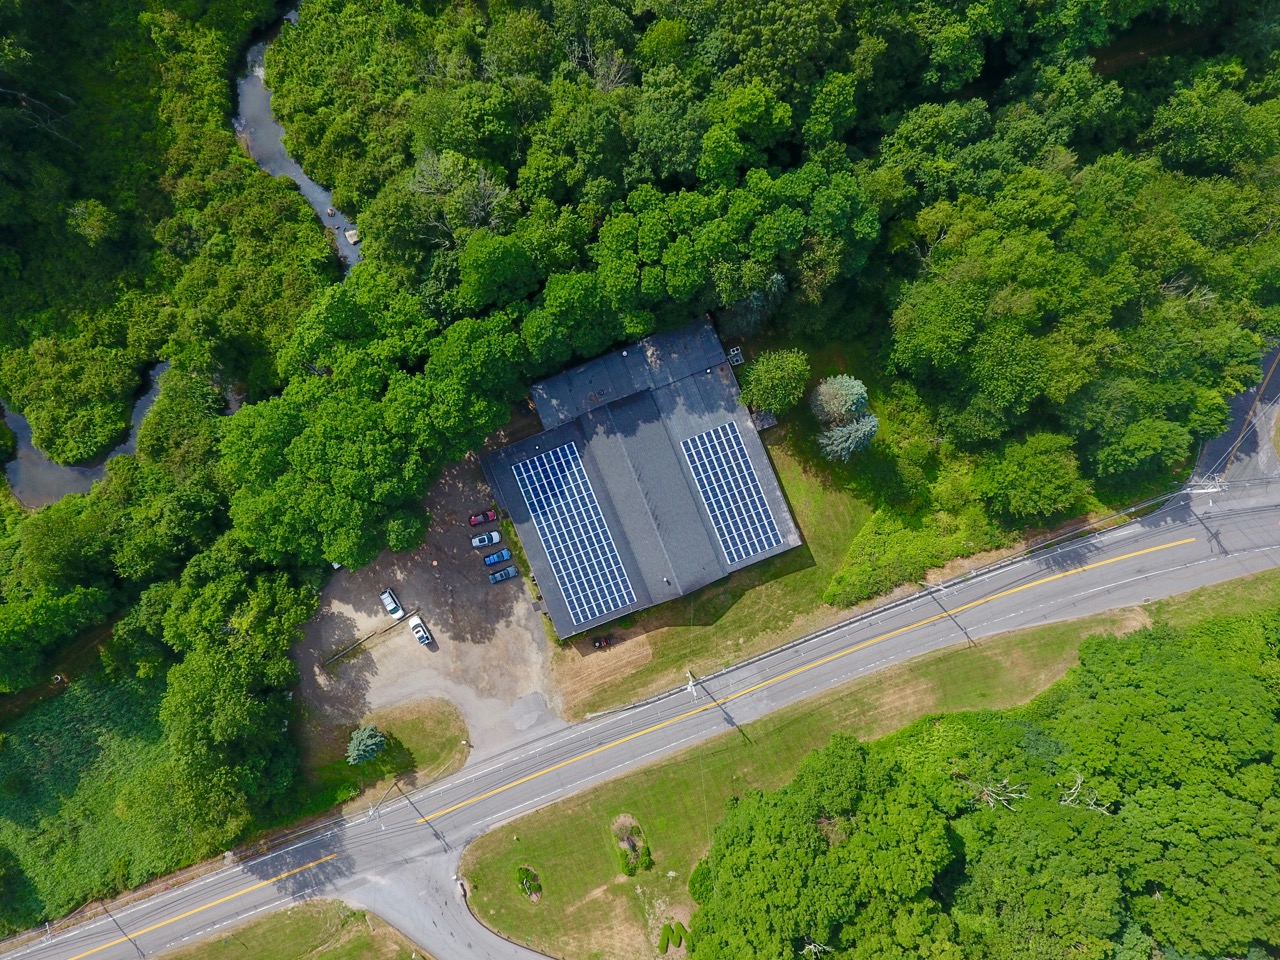 Newly installed solar panels will provide close to 100% of the distillery electrical power.